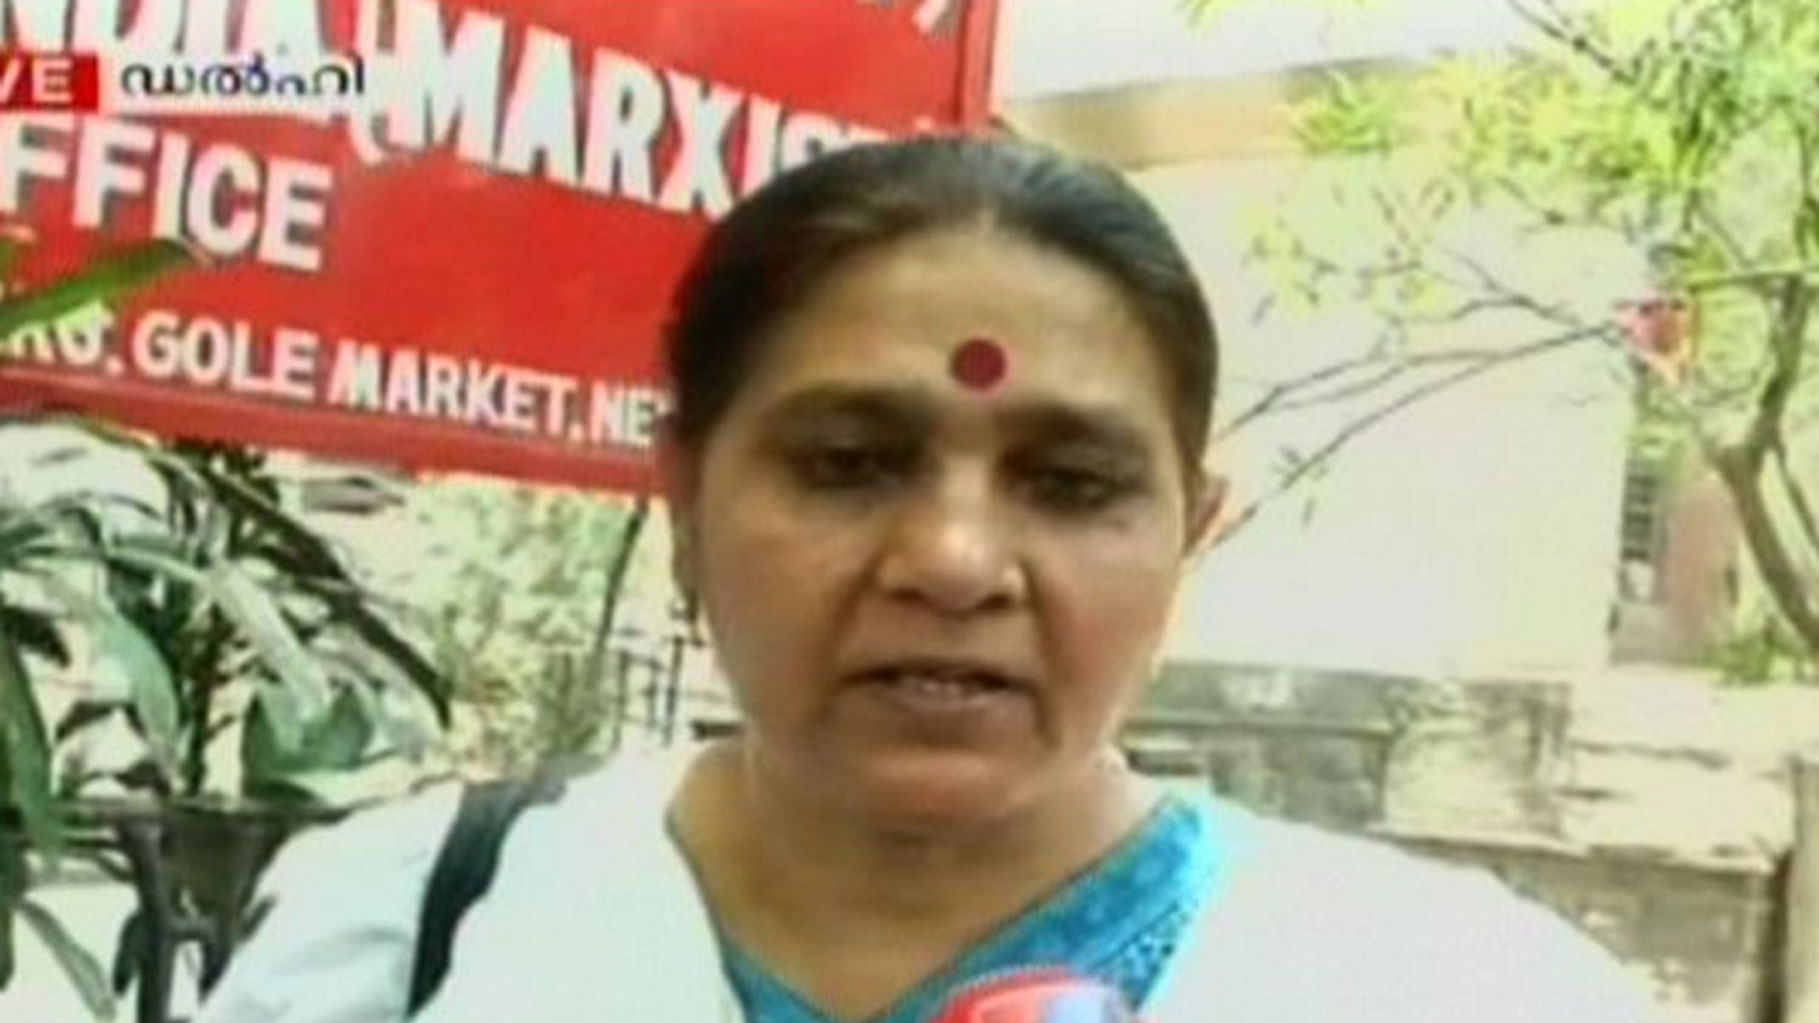 Women’s rights activist and CPI(M) leader Jagmati Sangwan. (Photo: Twitter <a href="https://twitter.com/manoramaonline">@manoramaonline</a>)